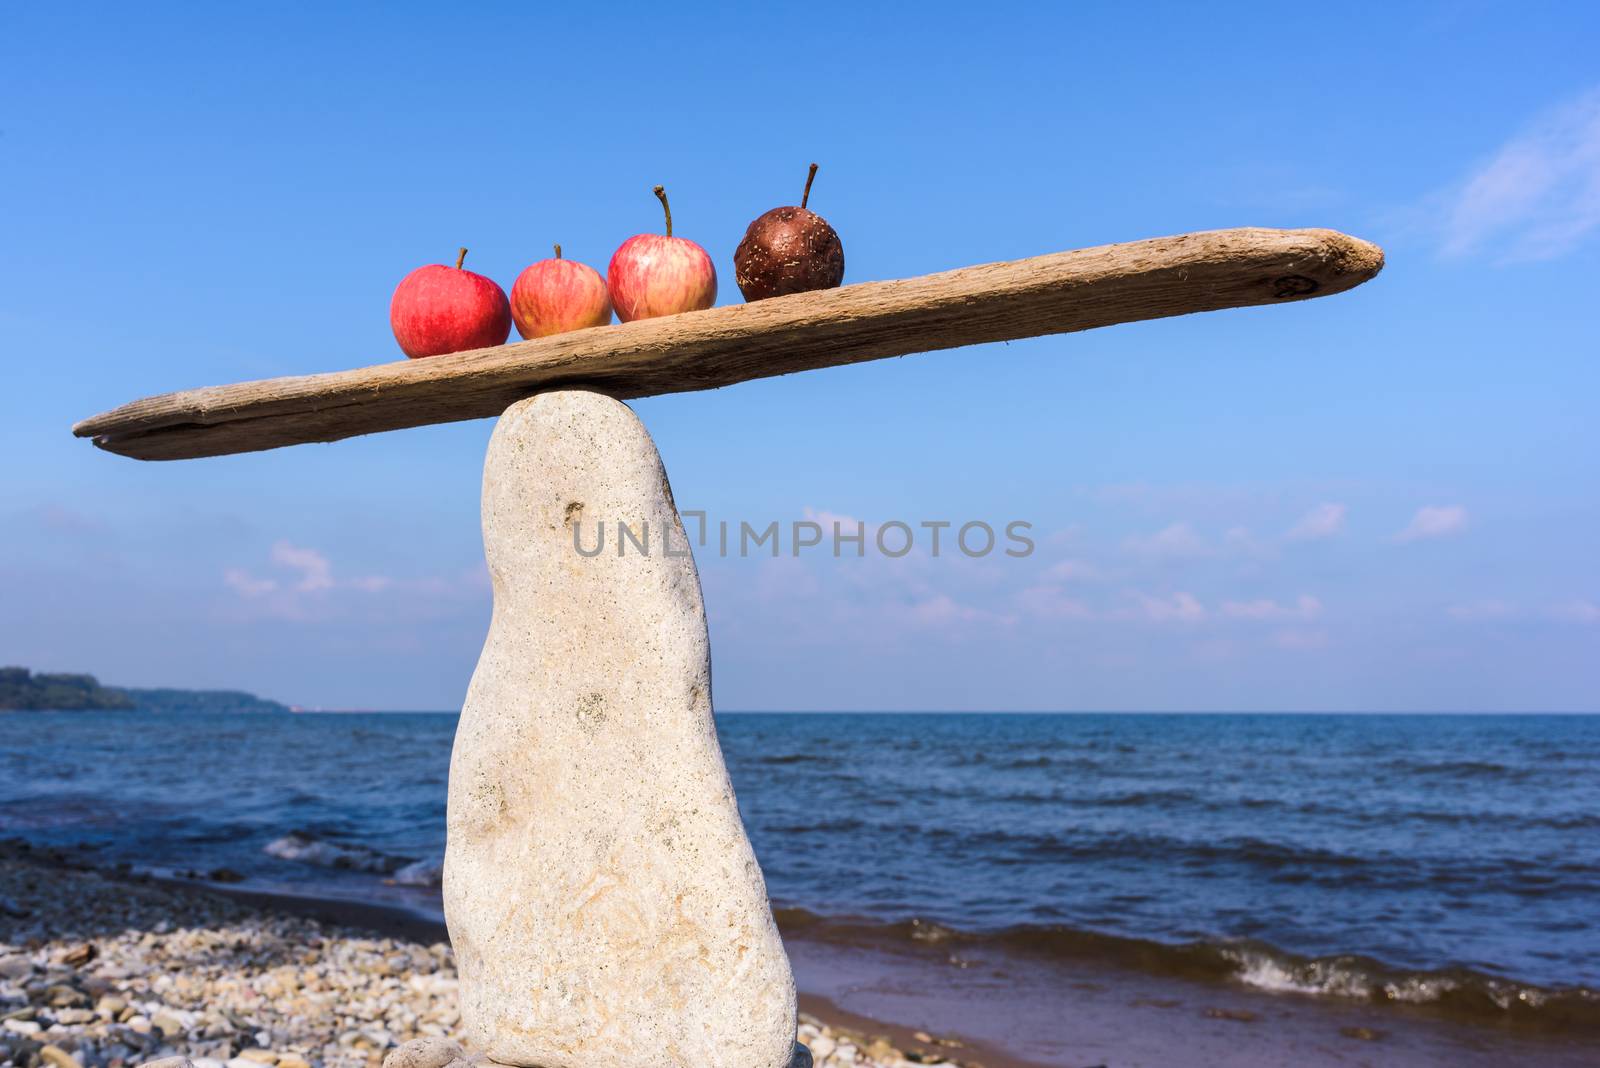 Apples in balance on narrow plank by styf22